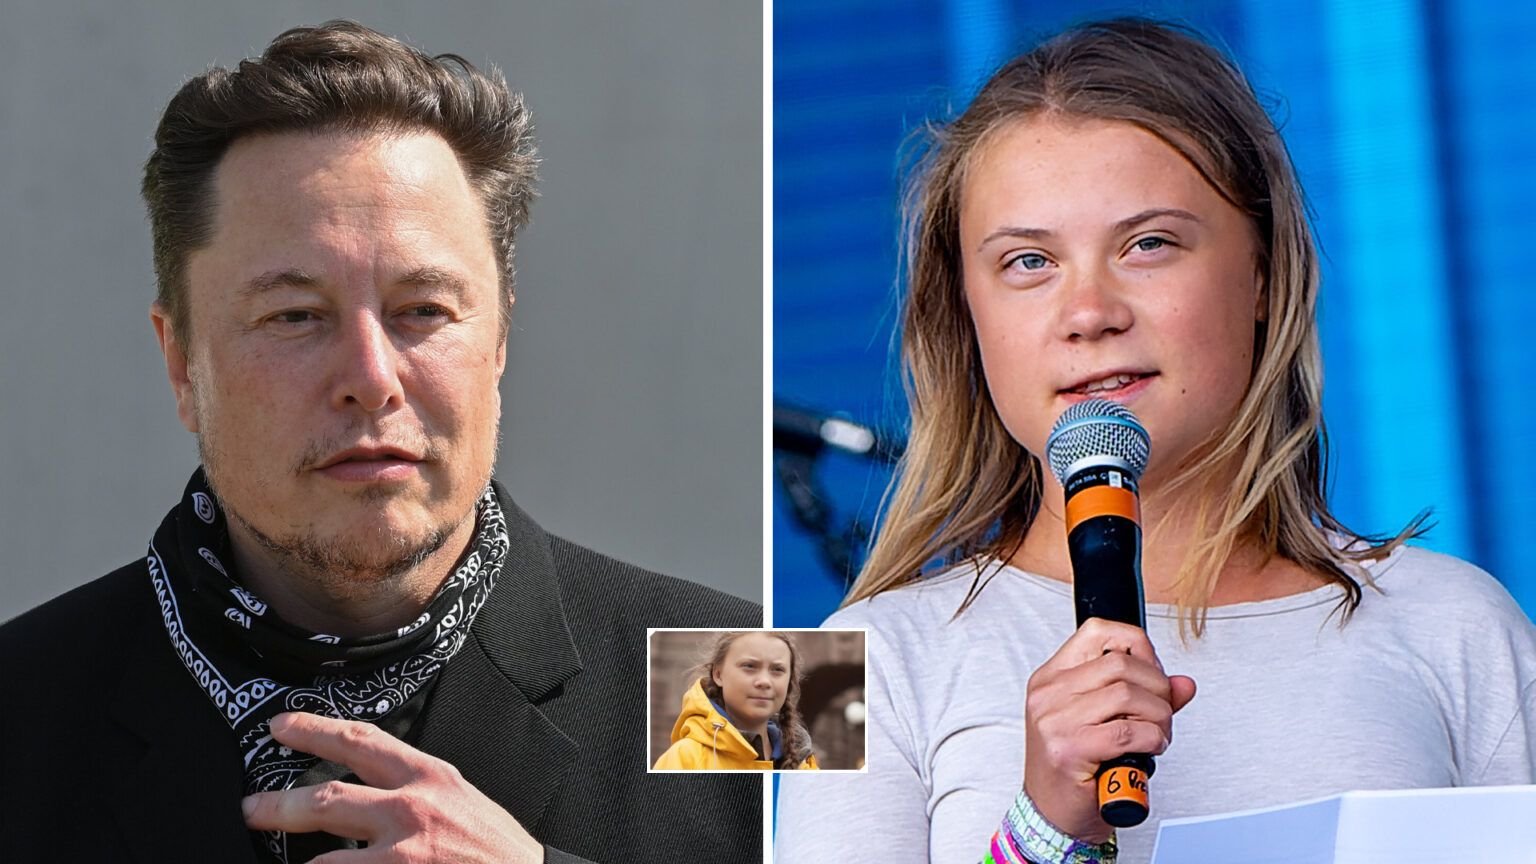 “I think she’s cool”: Elon Musk defends Greta Thunberg after Andrew Tate Twitter spat